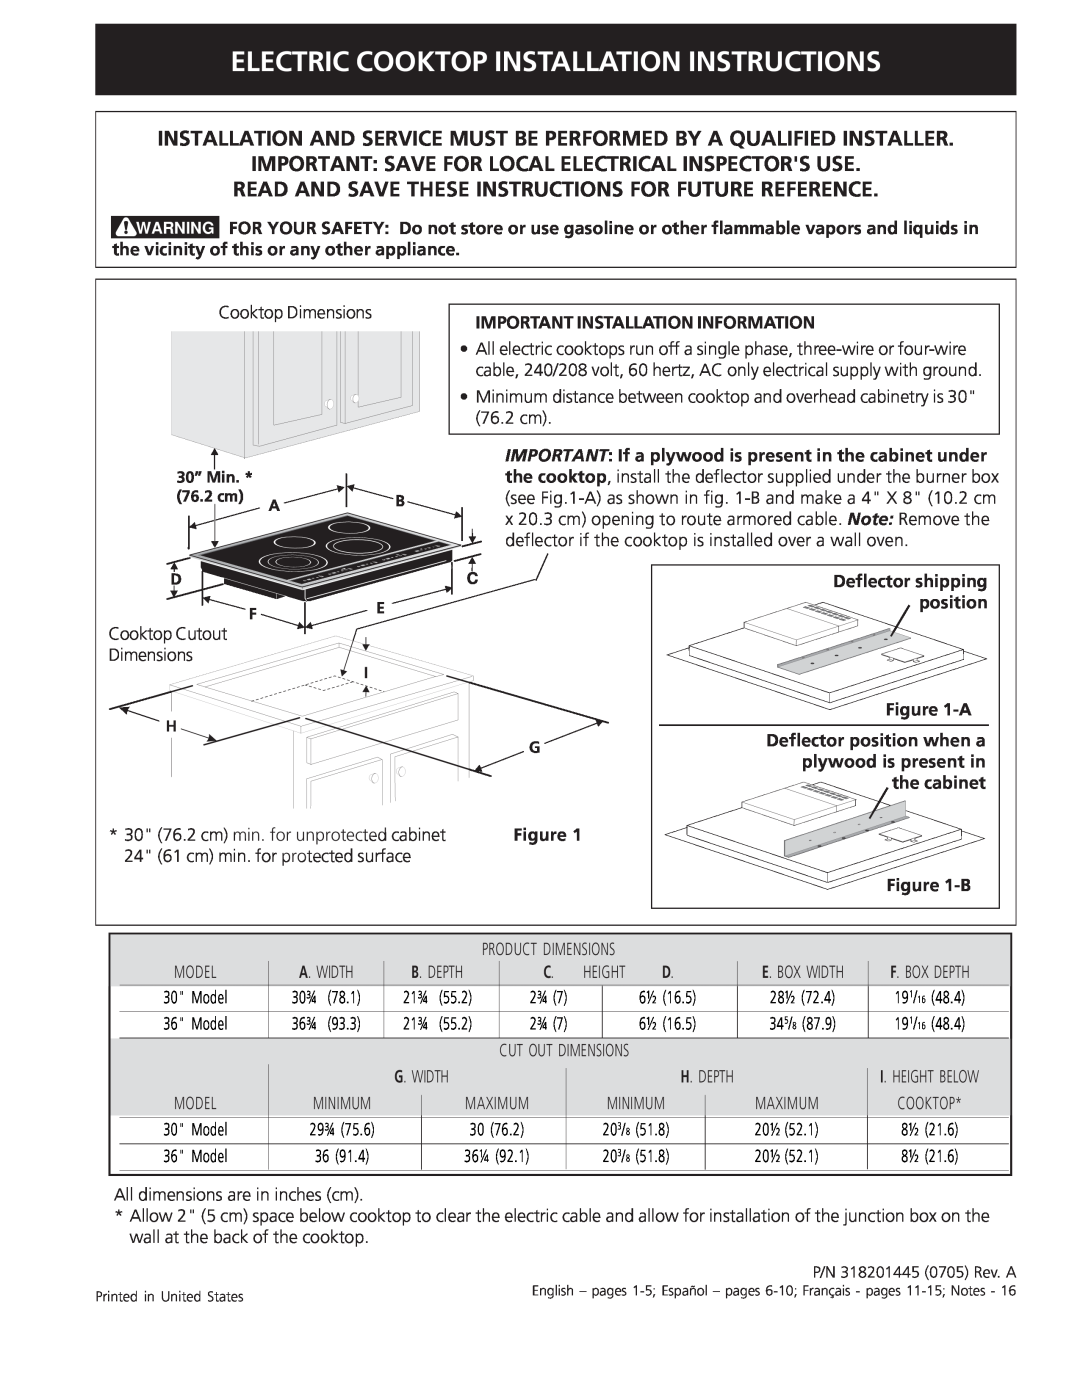 Electrolux 30 installation instructions Electric Cooktop Installation Instructions 